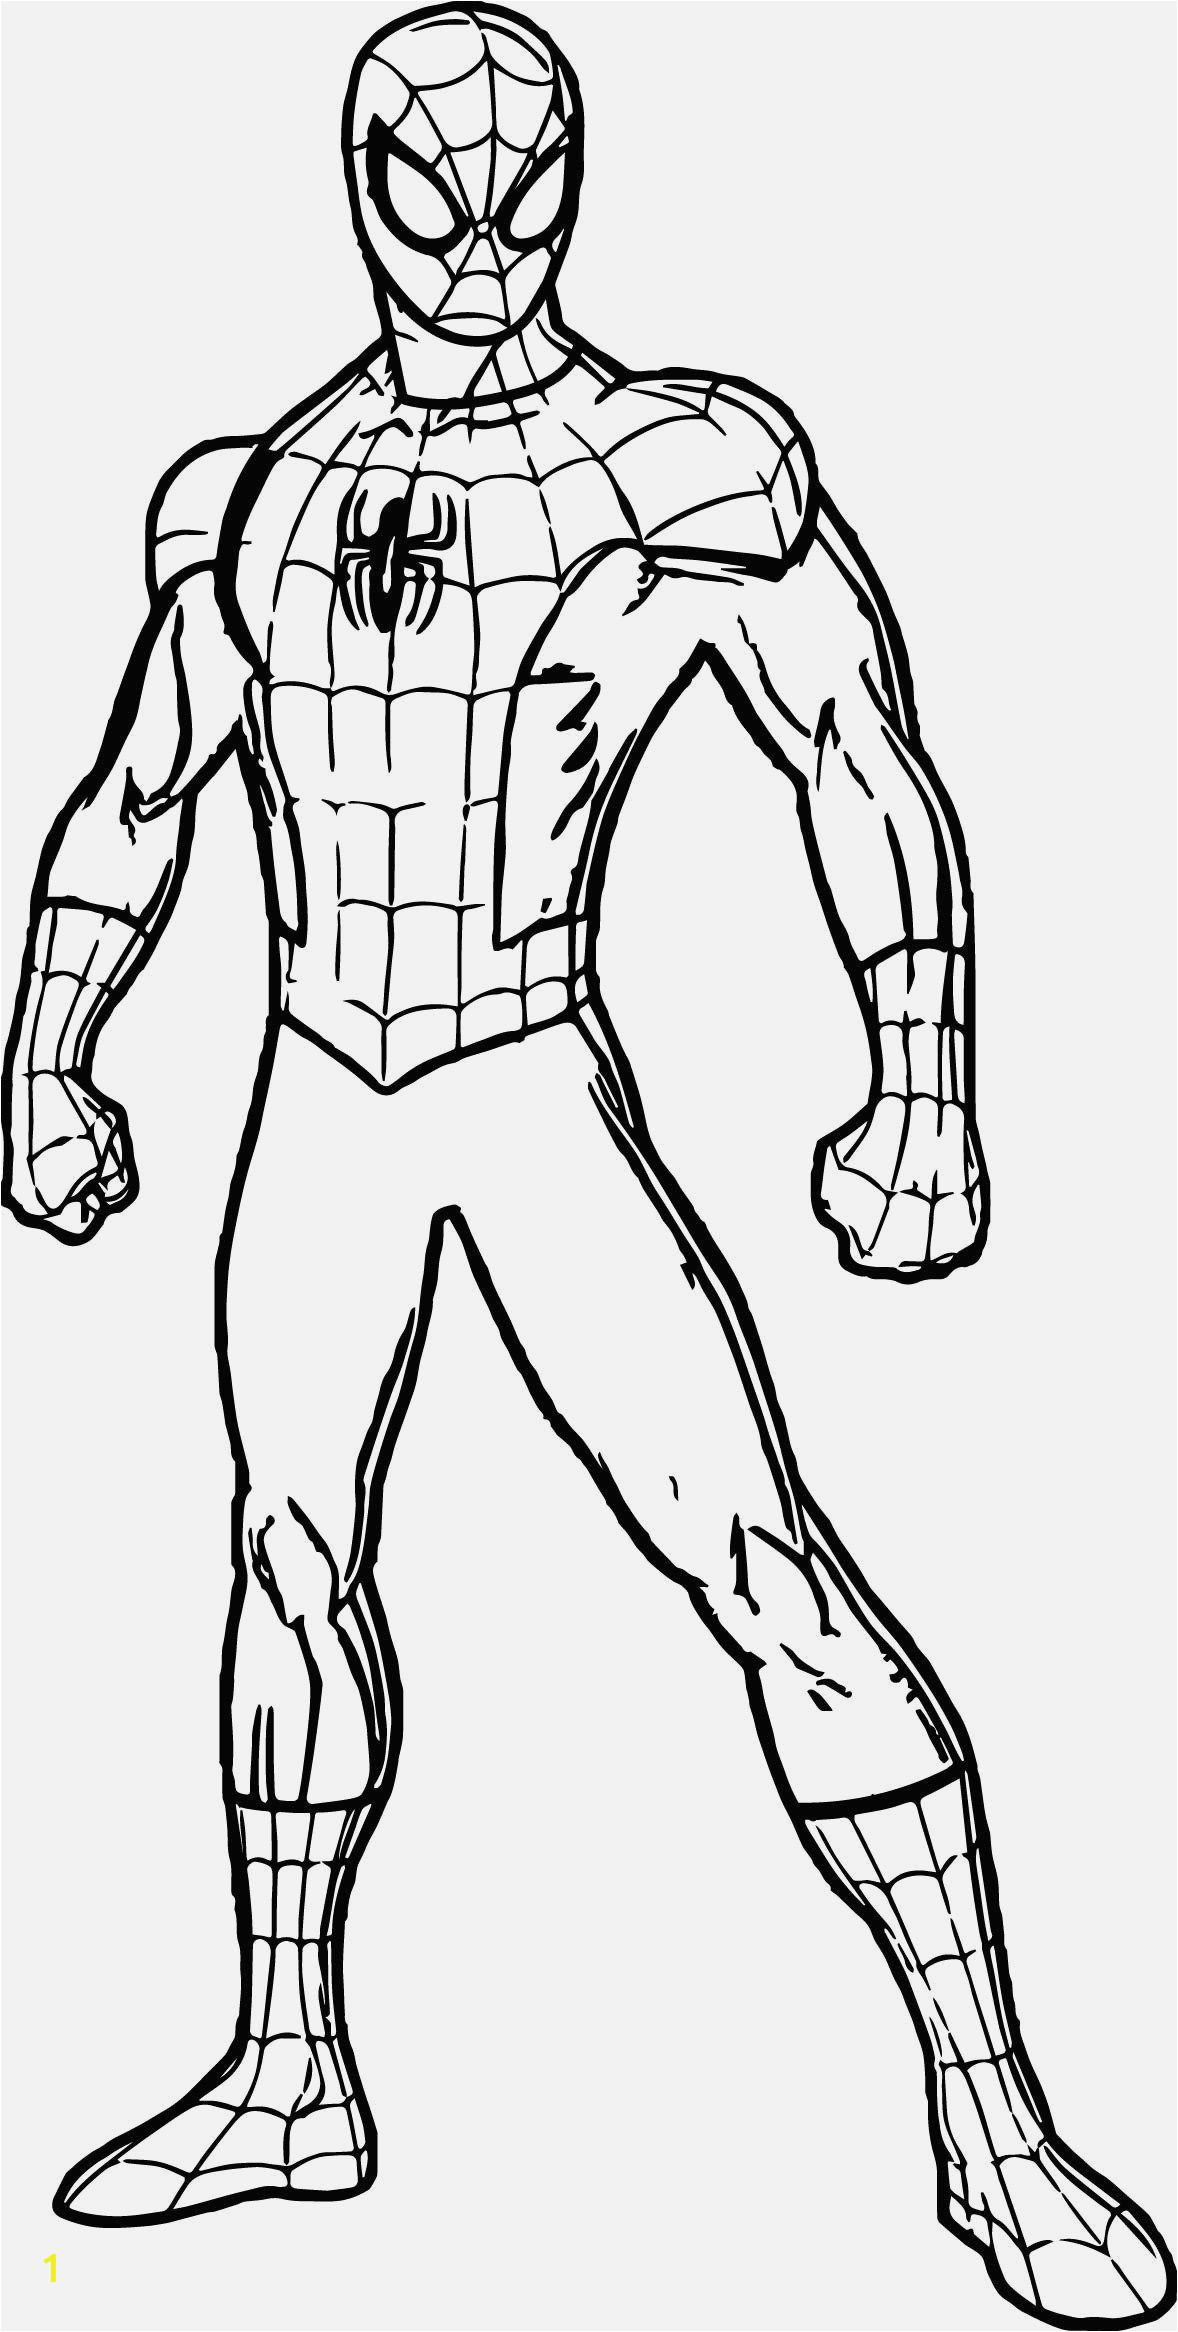 Spiderman Coloring Pictures to Print Marvelous Image Of Free Spiderman Coloring Pages